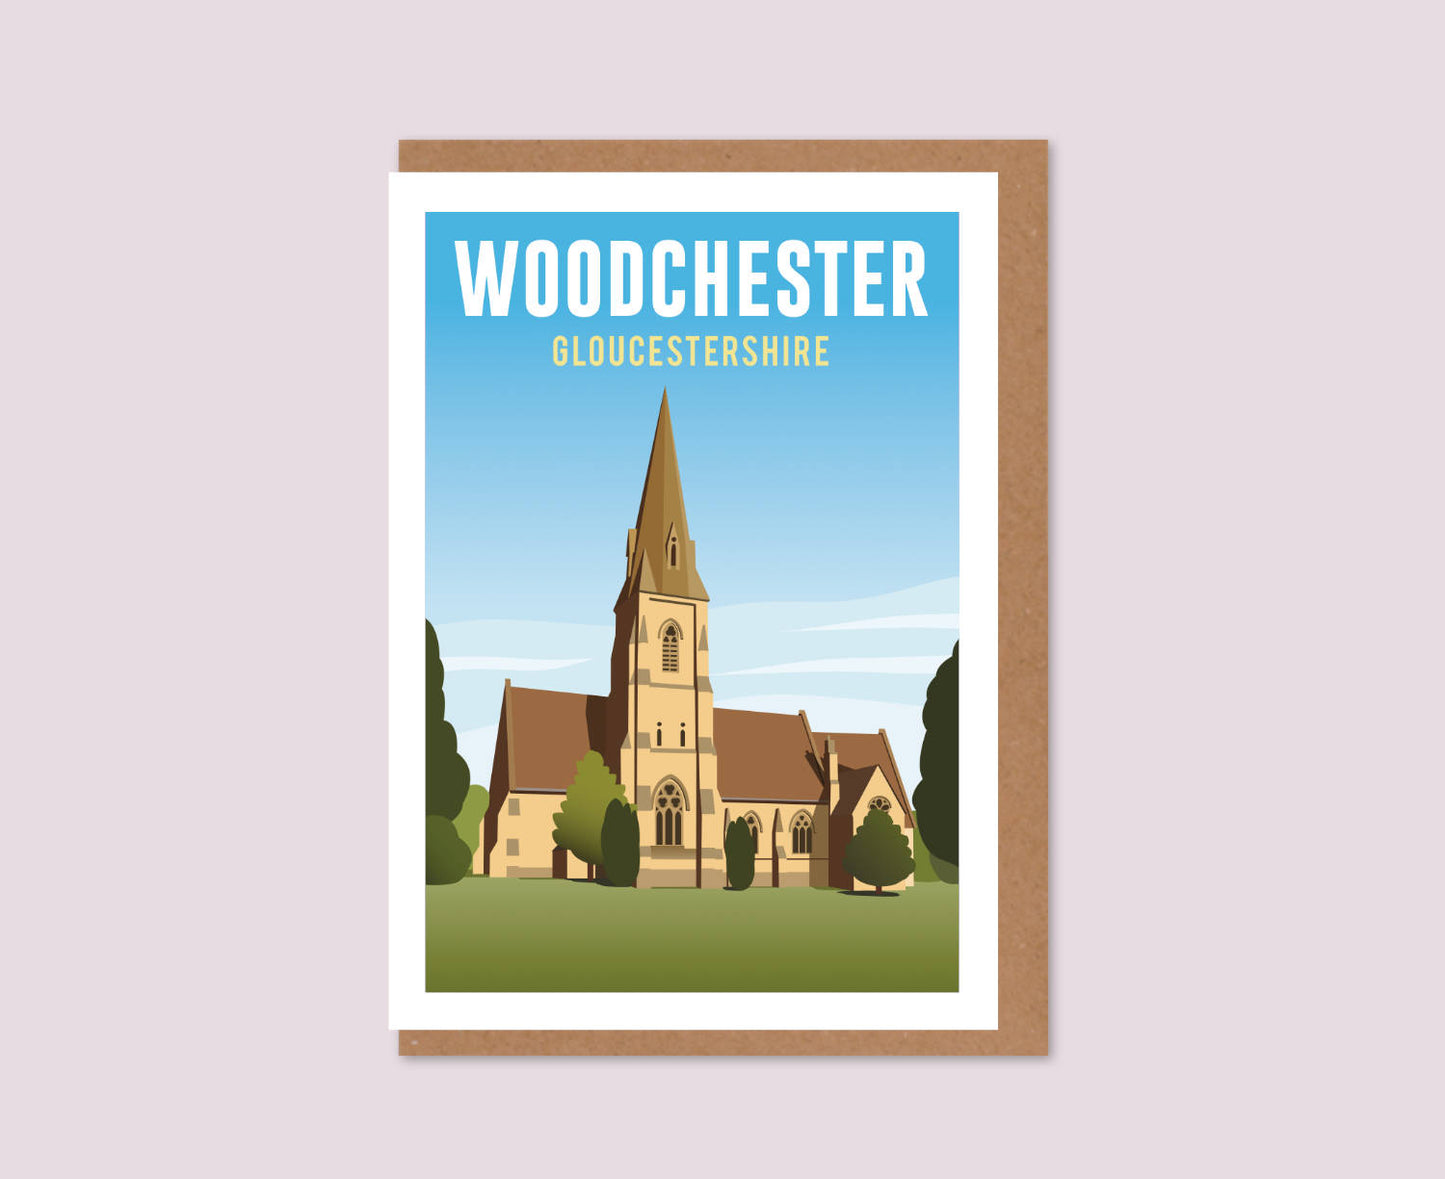 Woodchester Church Greeting Card Design